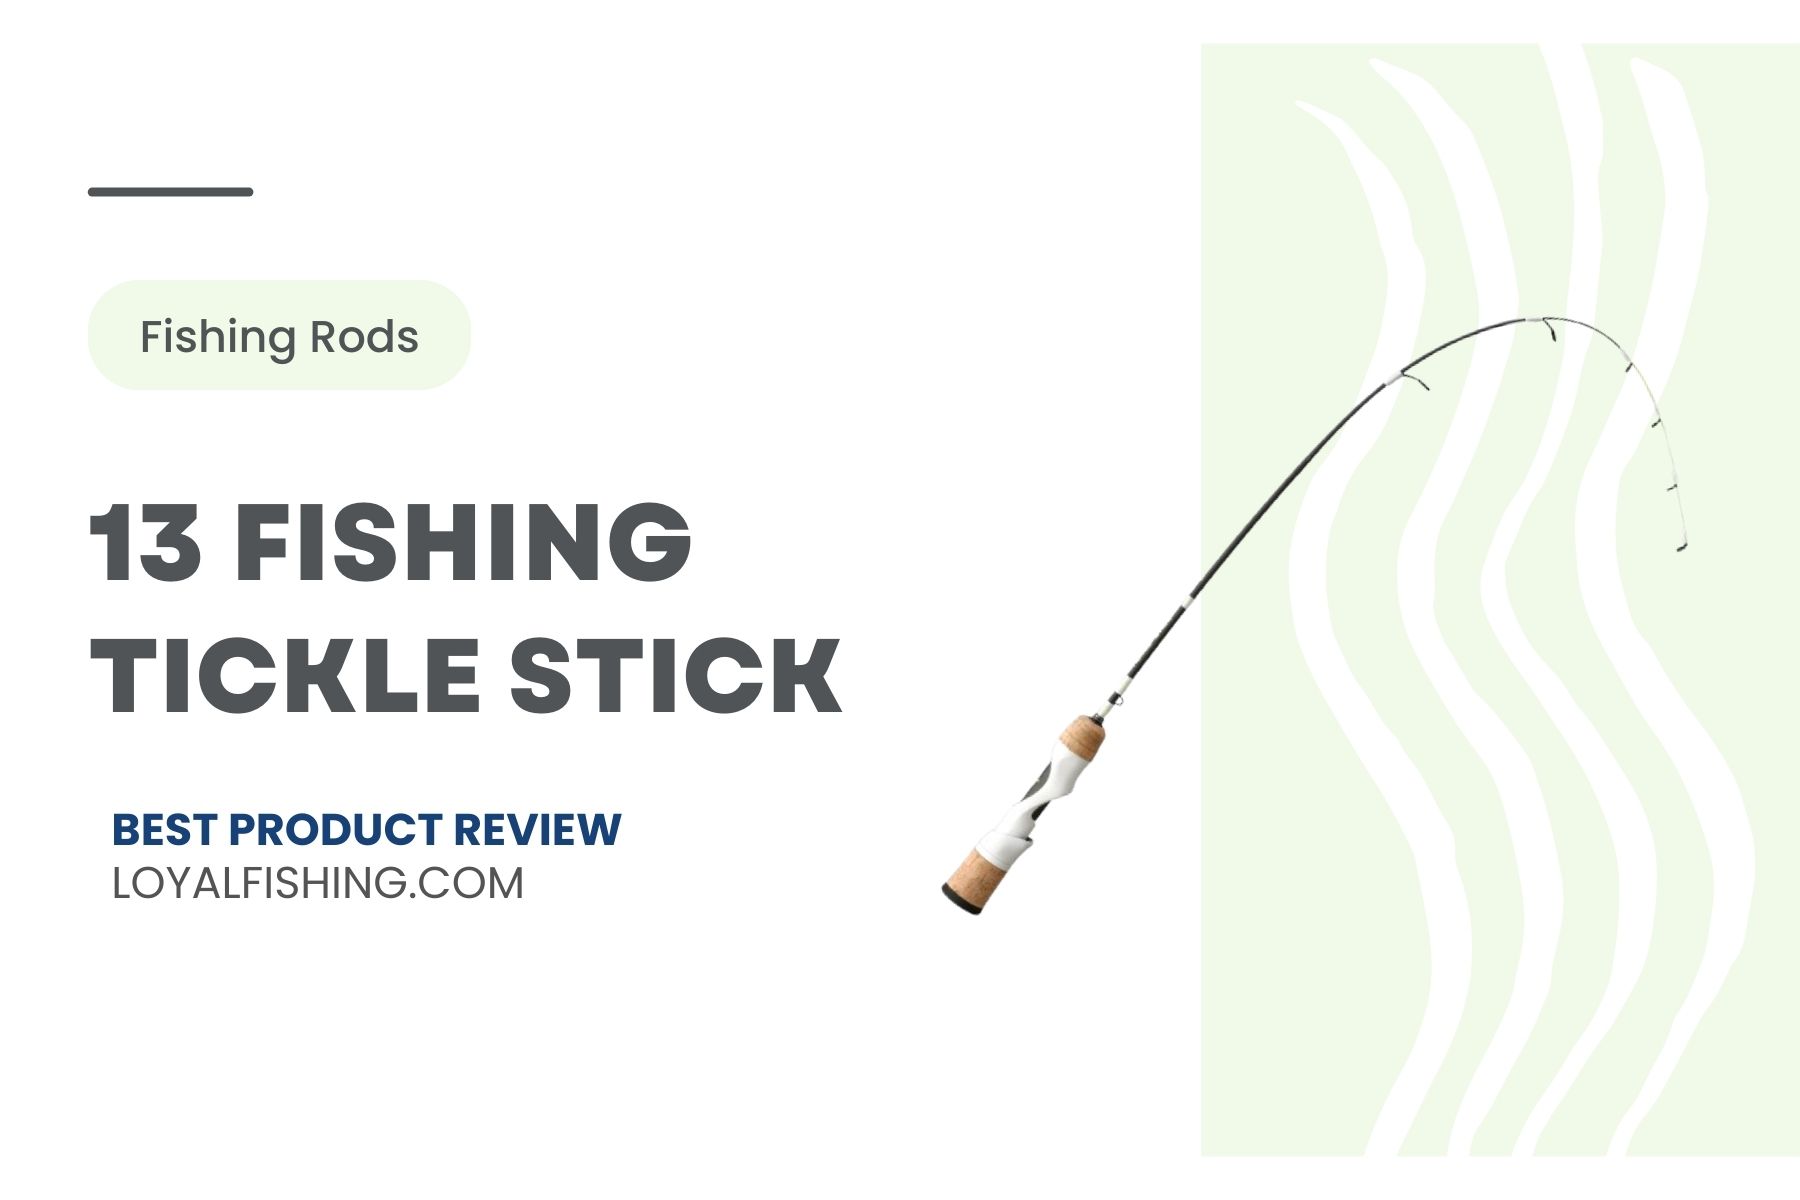 13 Fishing Tickle Stick - Post Review